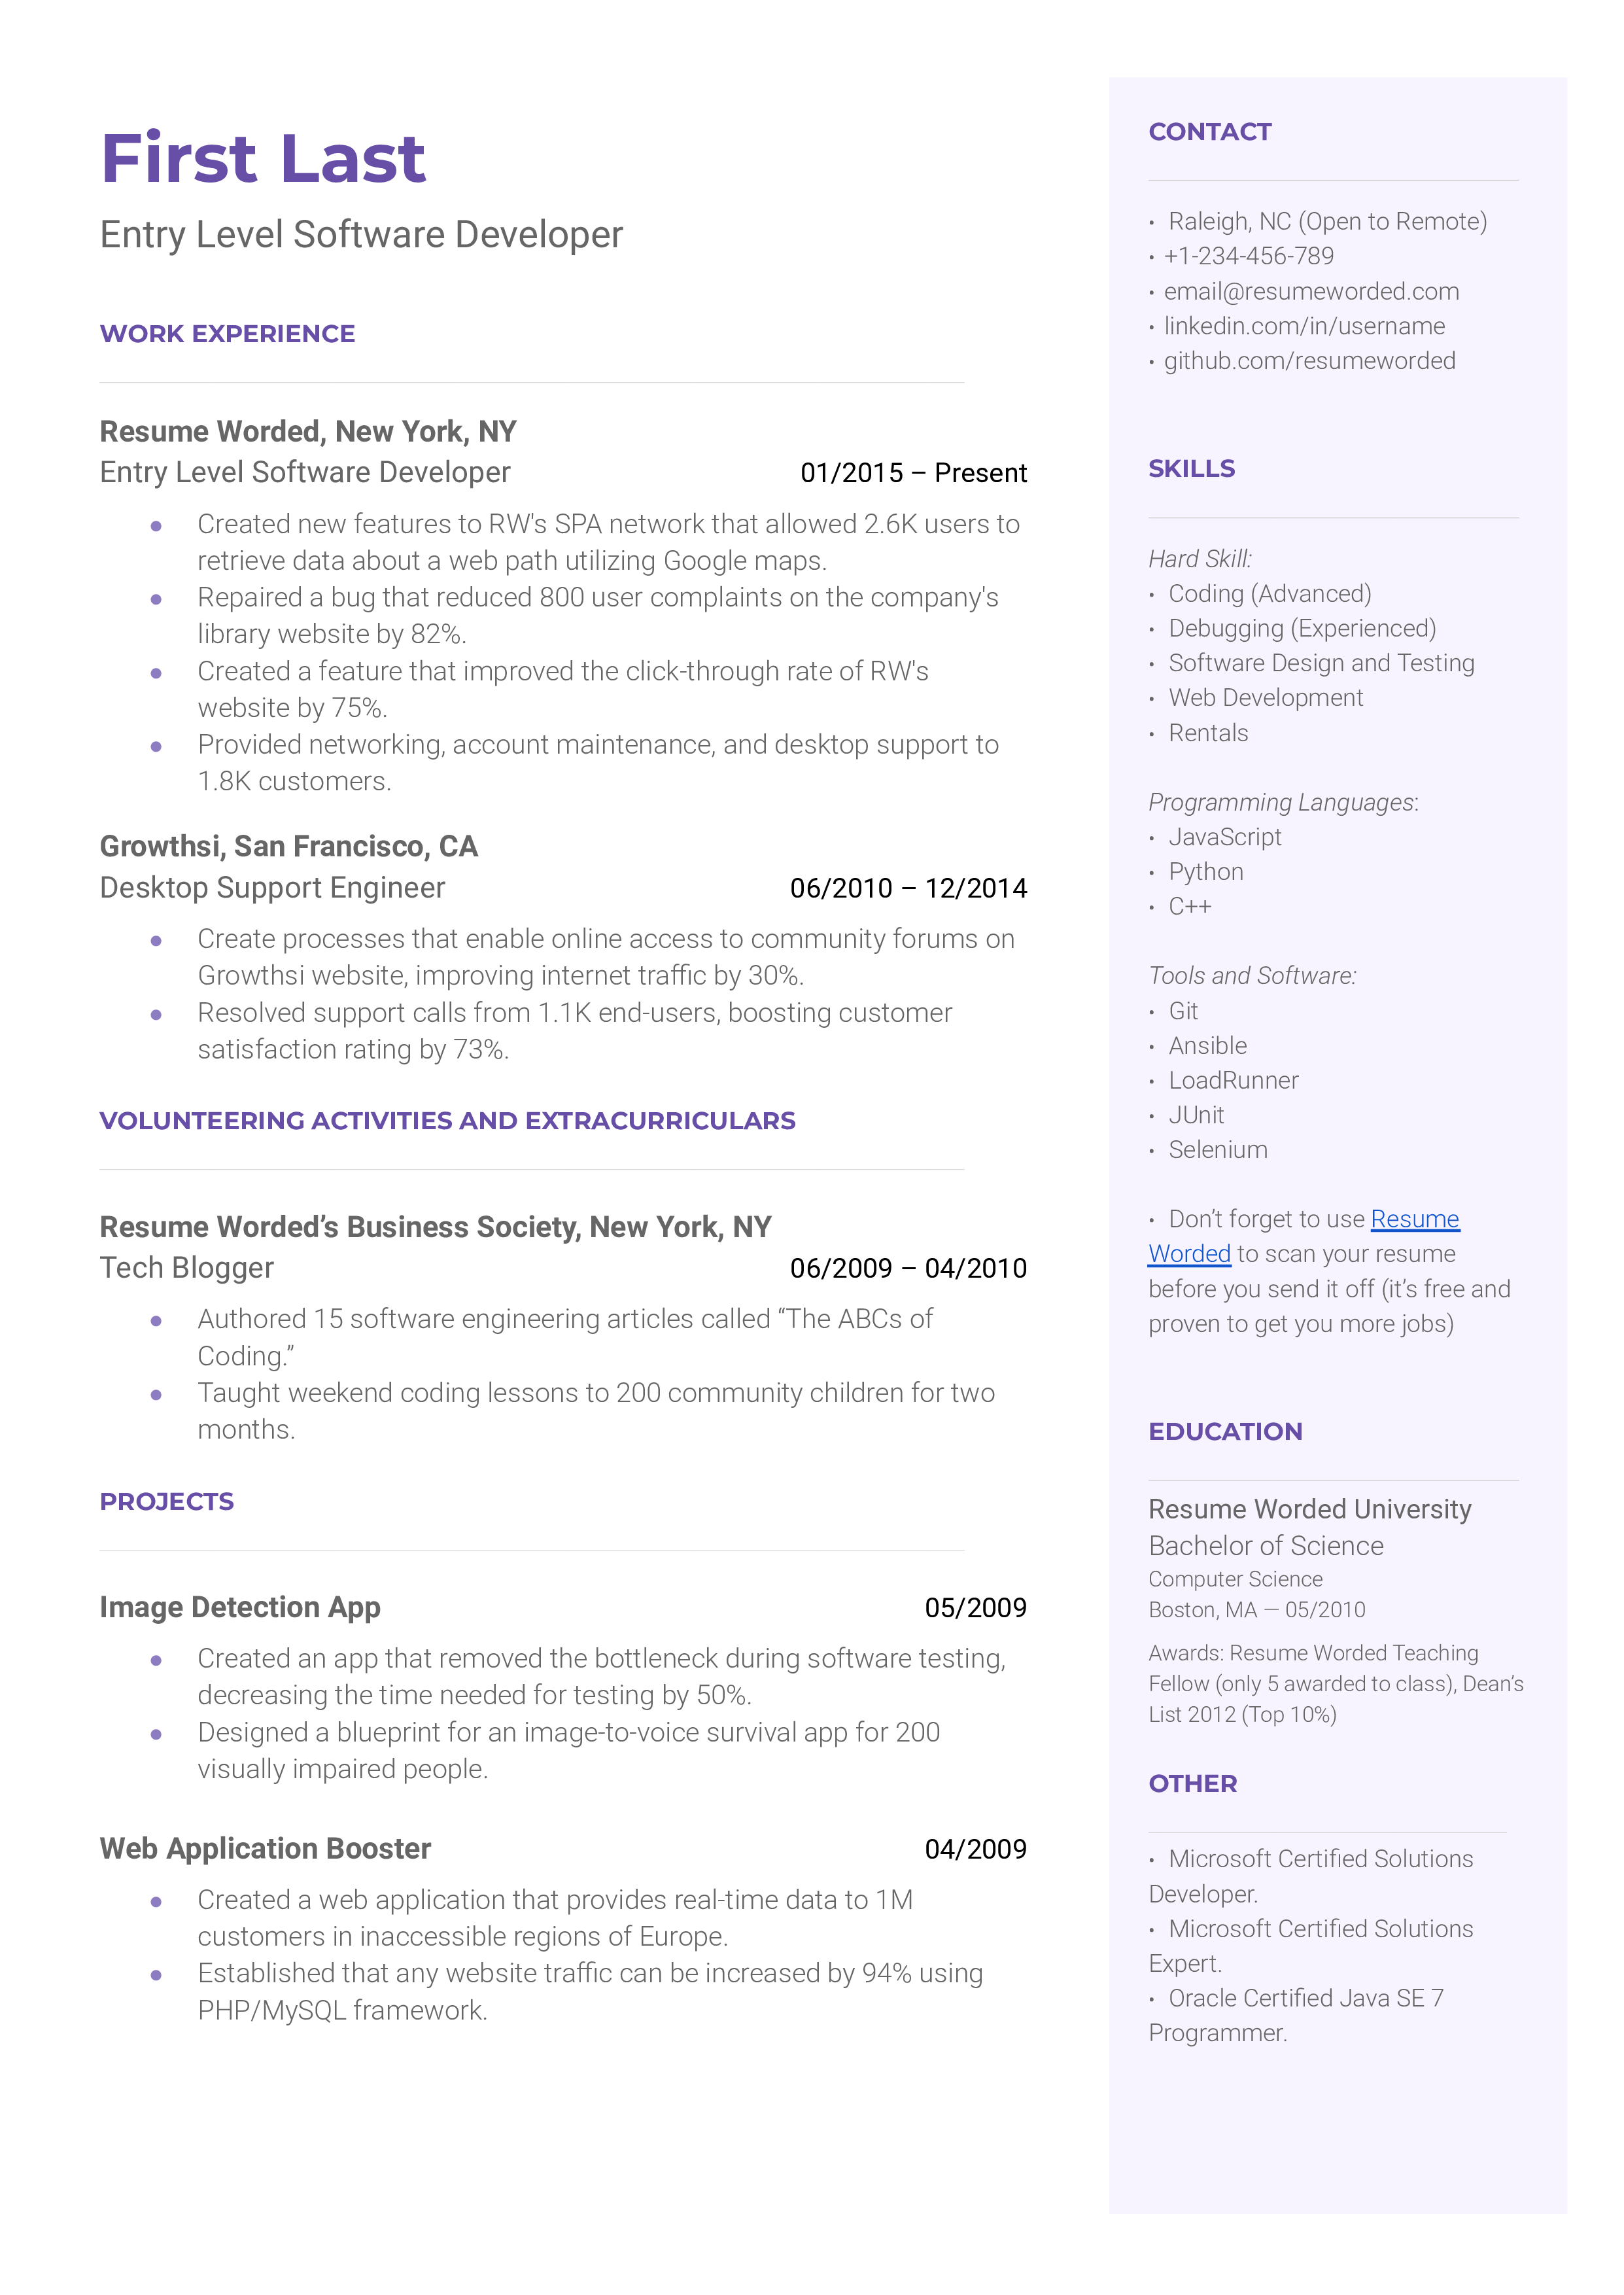 An entry-level software developer resume template that highlights volunteering experience and personal projects